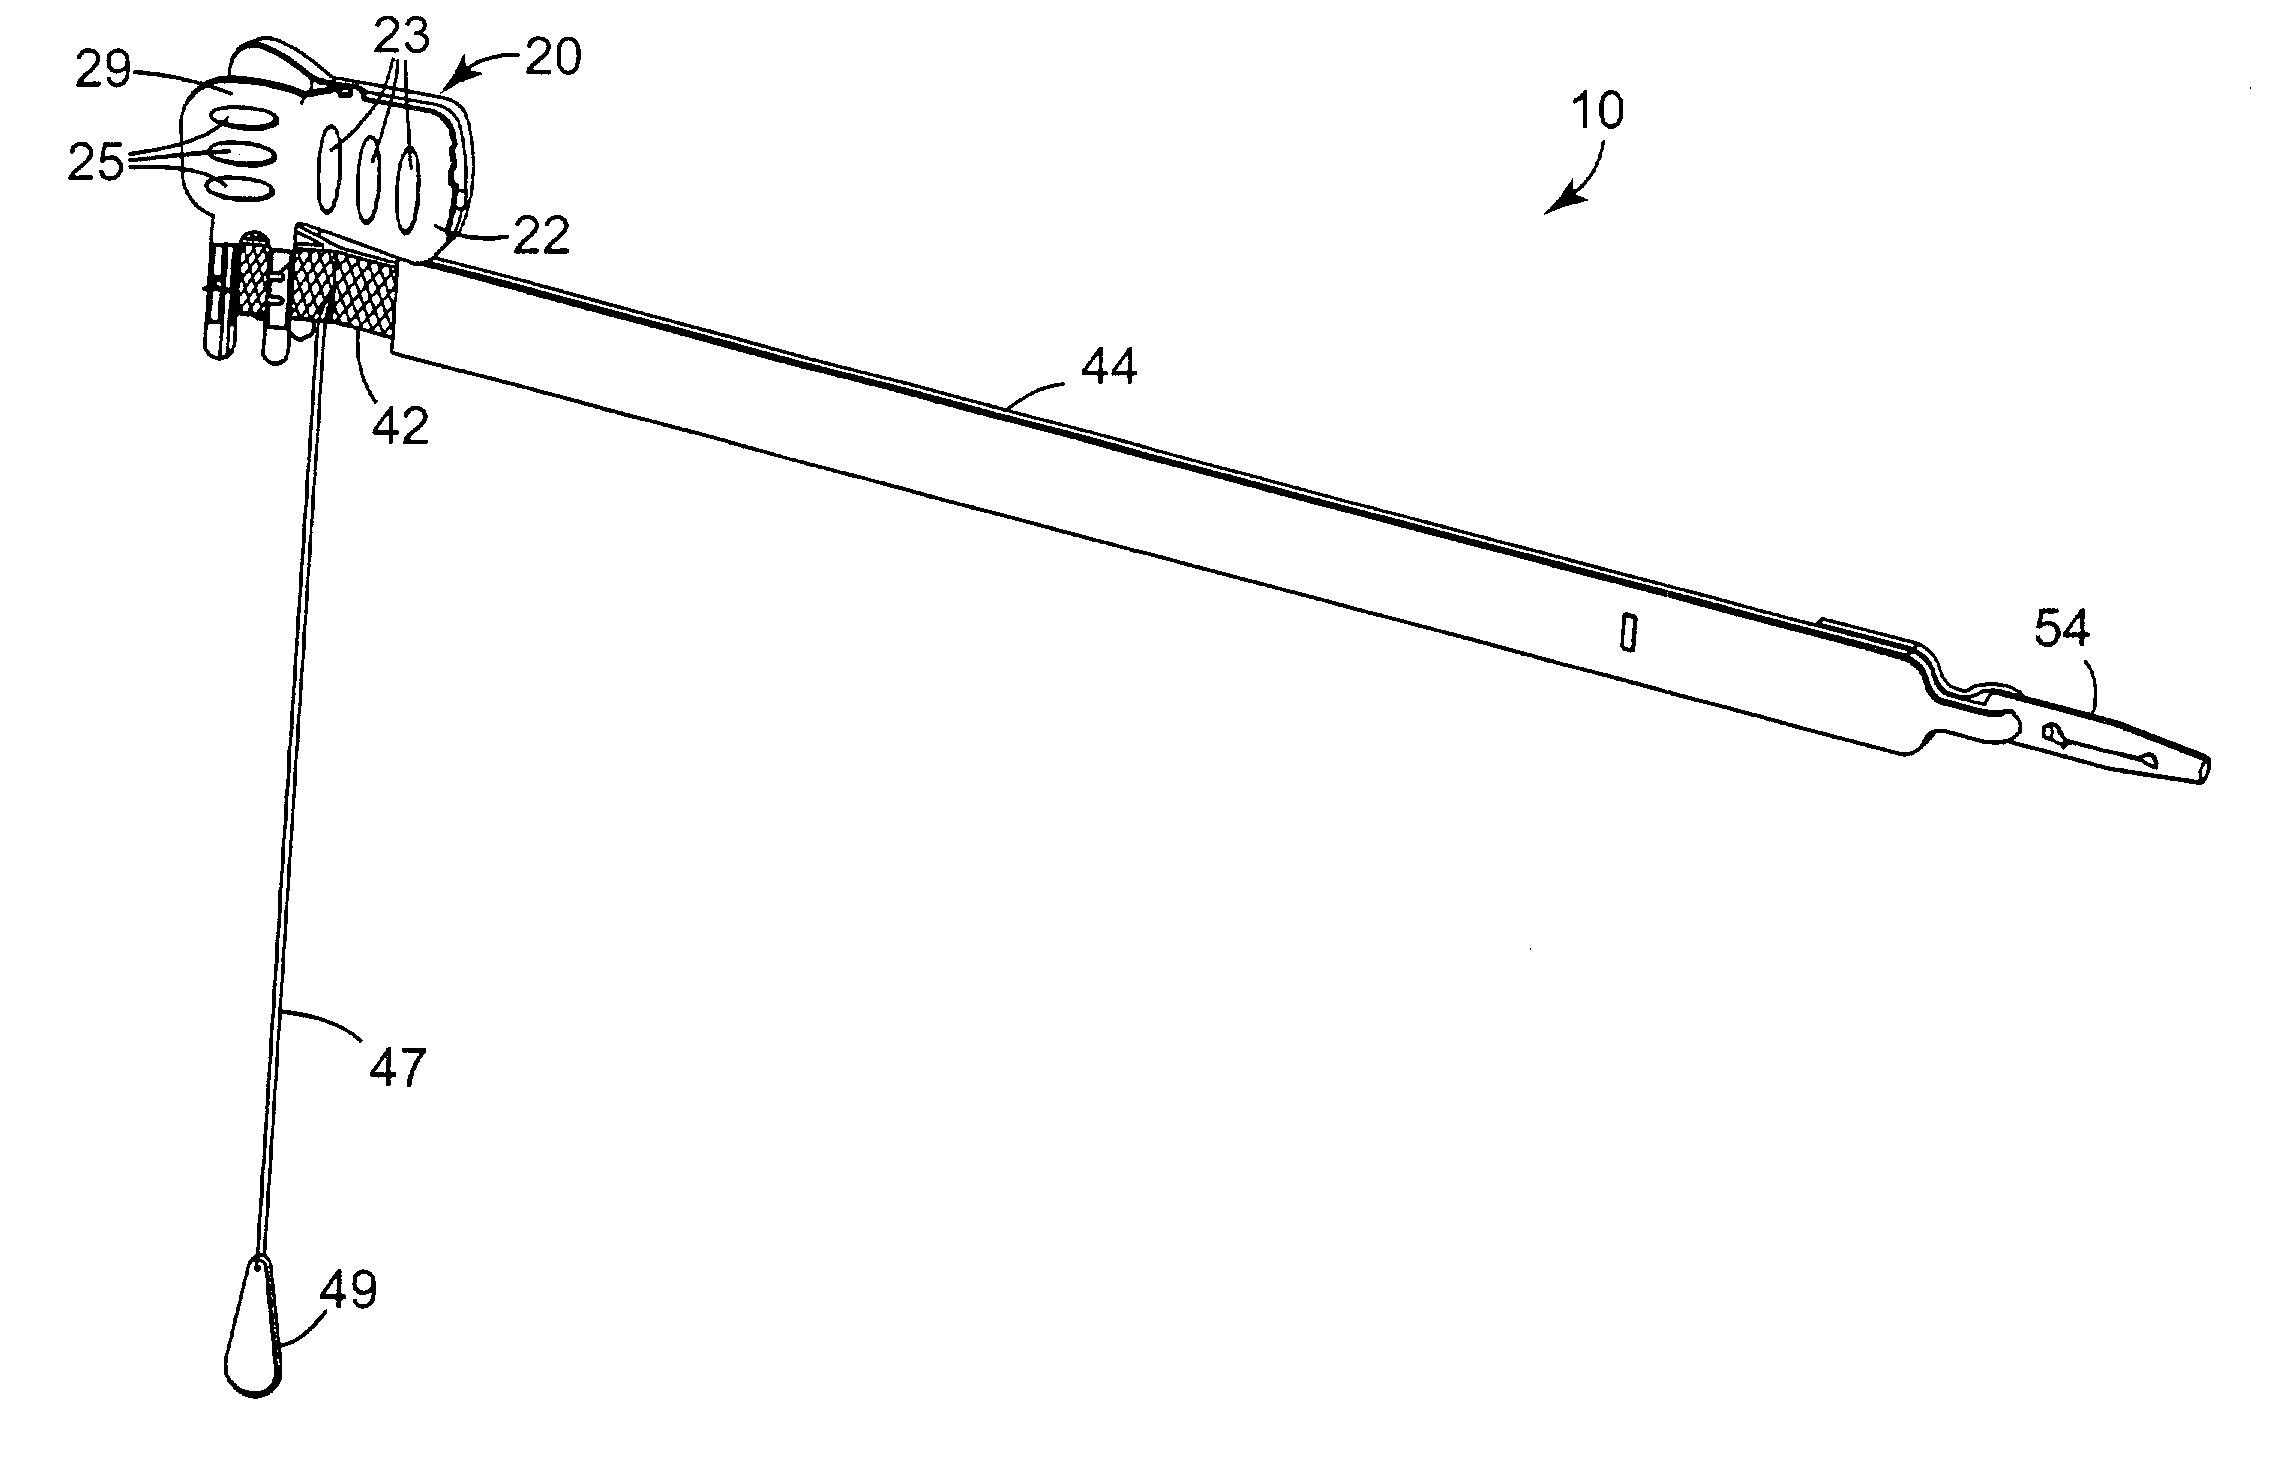 Pelvic floor implant system and method of assembly